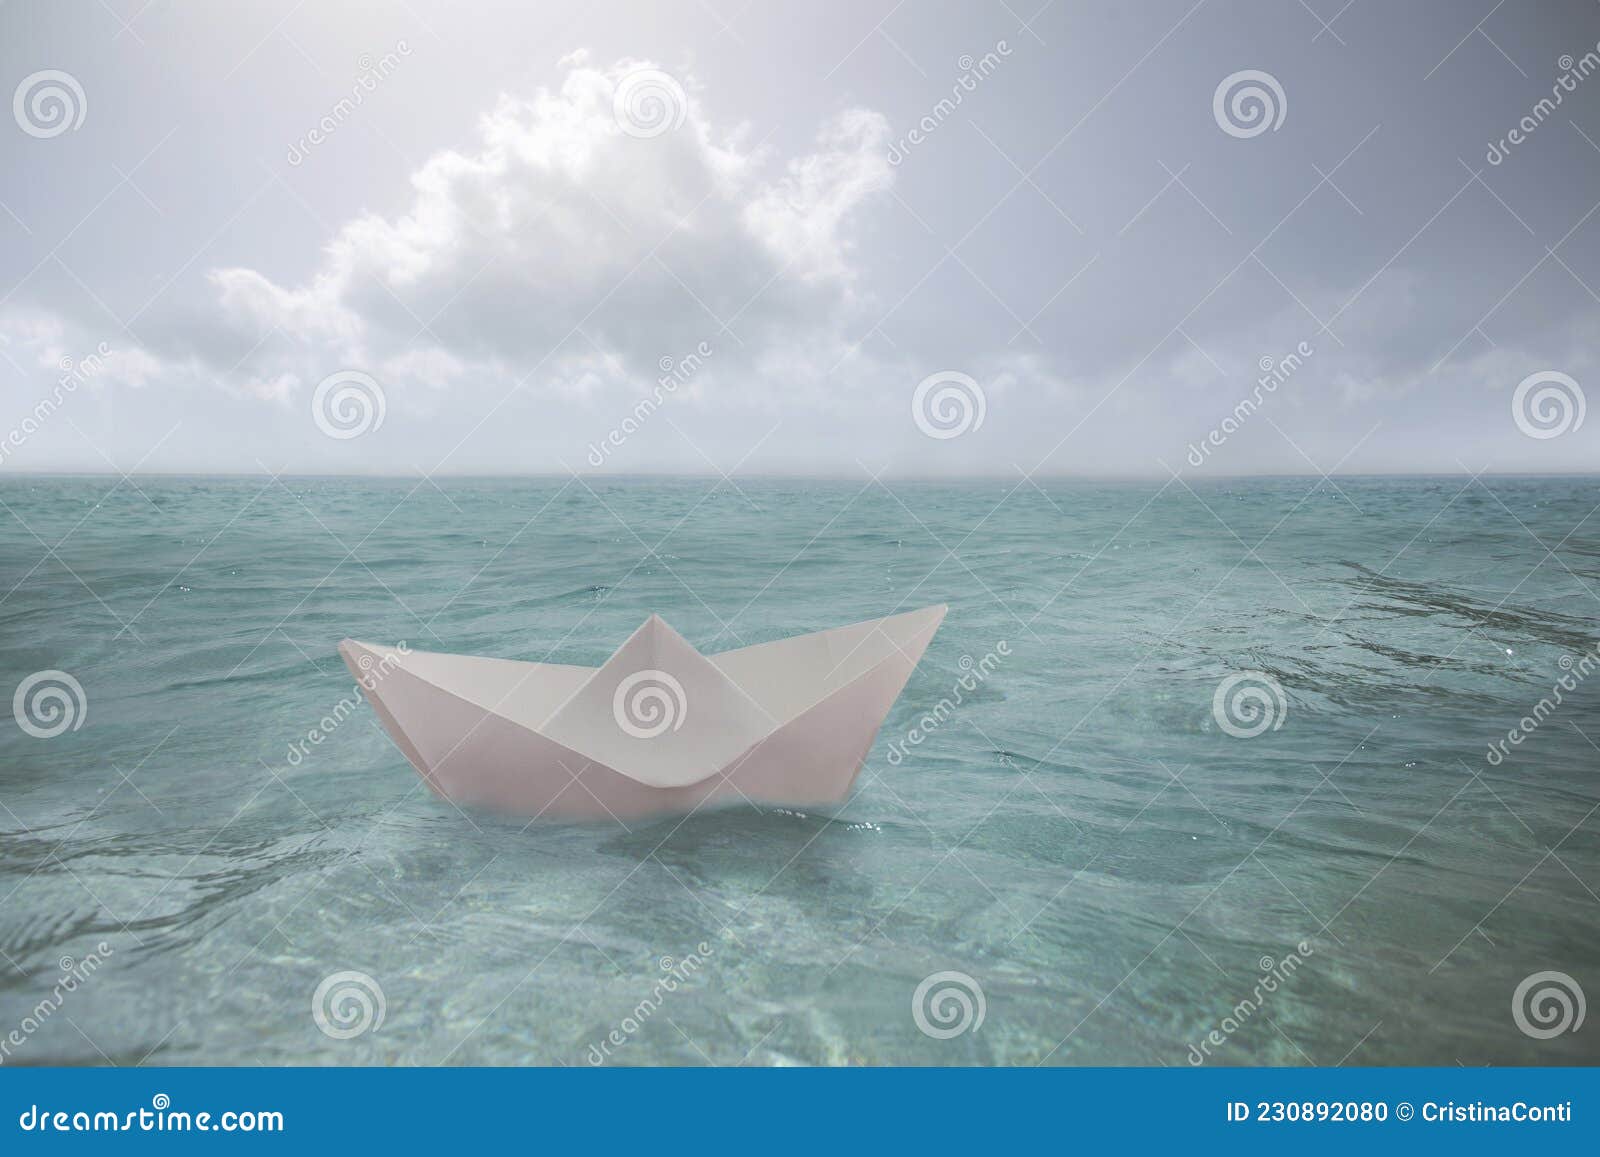 surreal paper boat travels alone in the infinite ocean